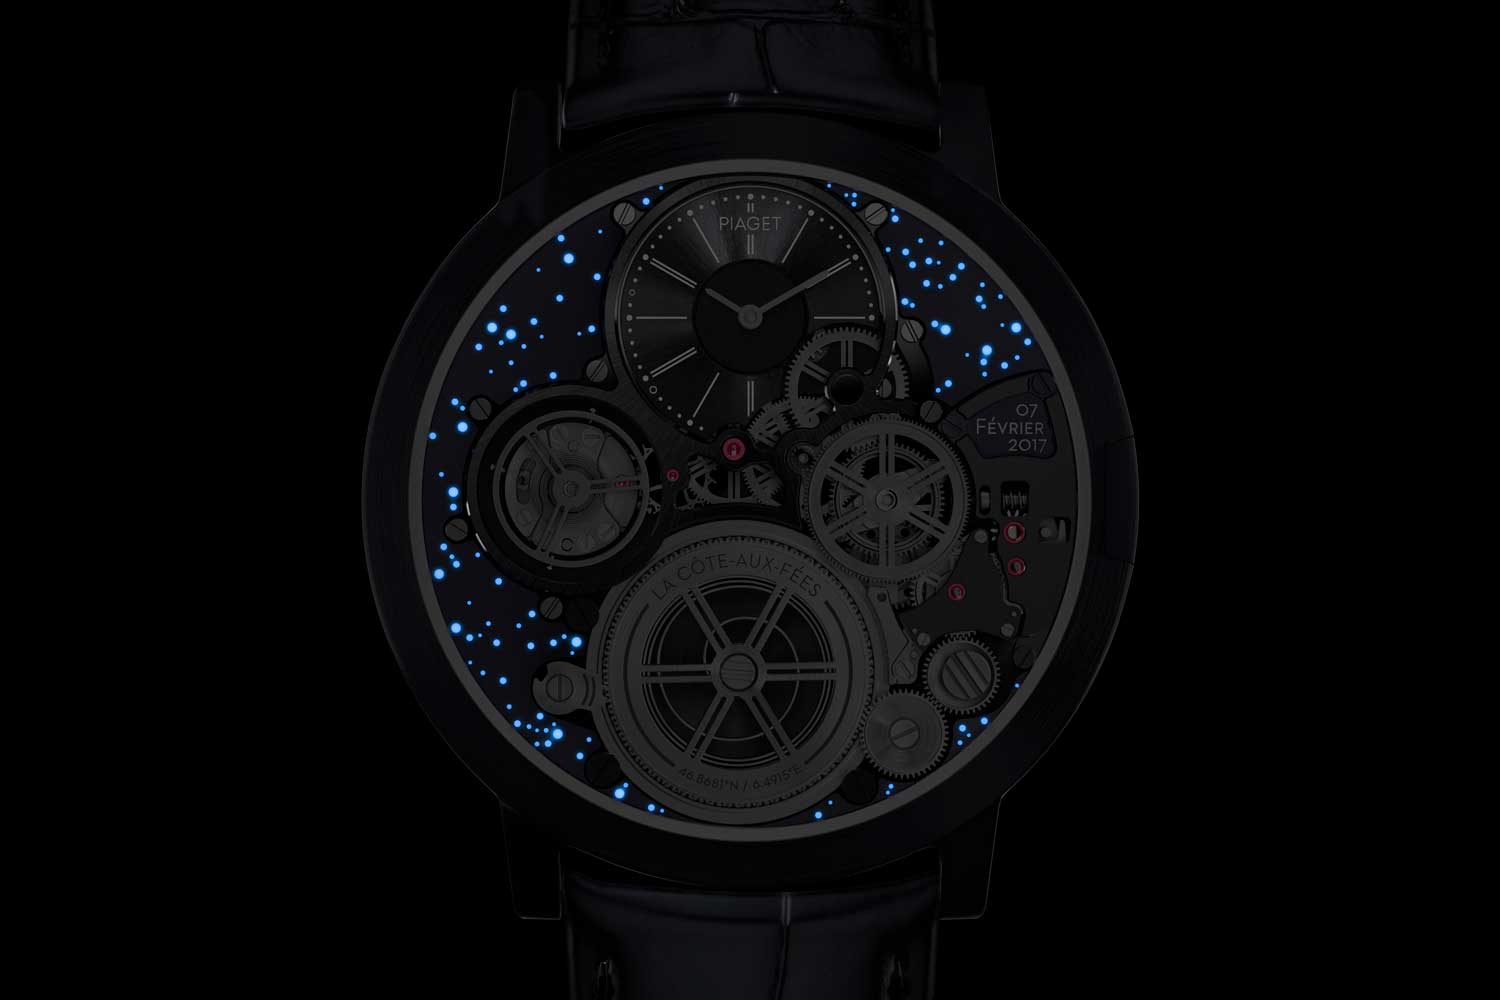 Super-LumiNova-filled dots on the dial depict the night sky above La Côte-aux-Fées at instant of the AUC’s birth